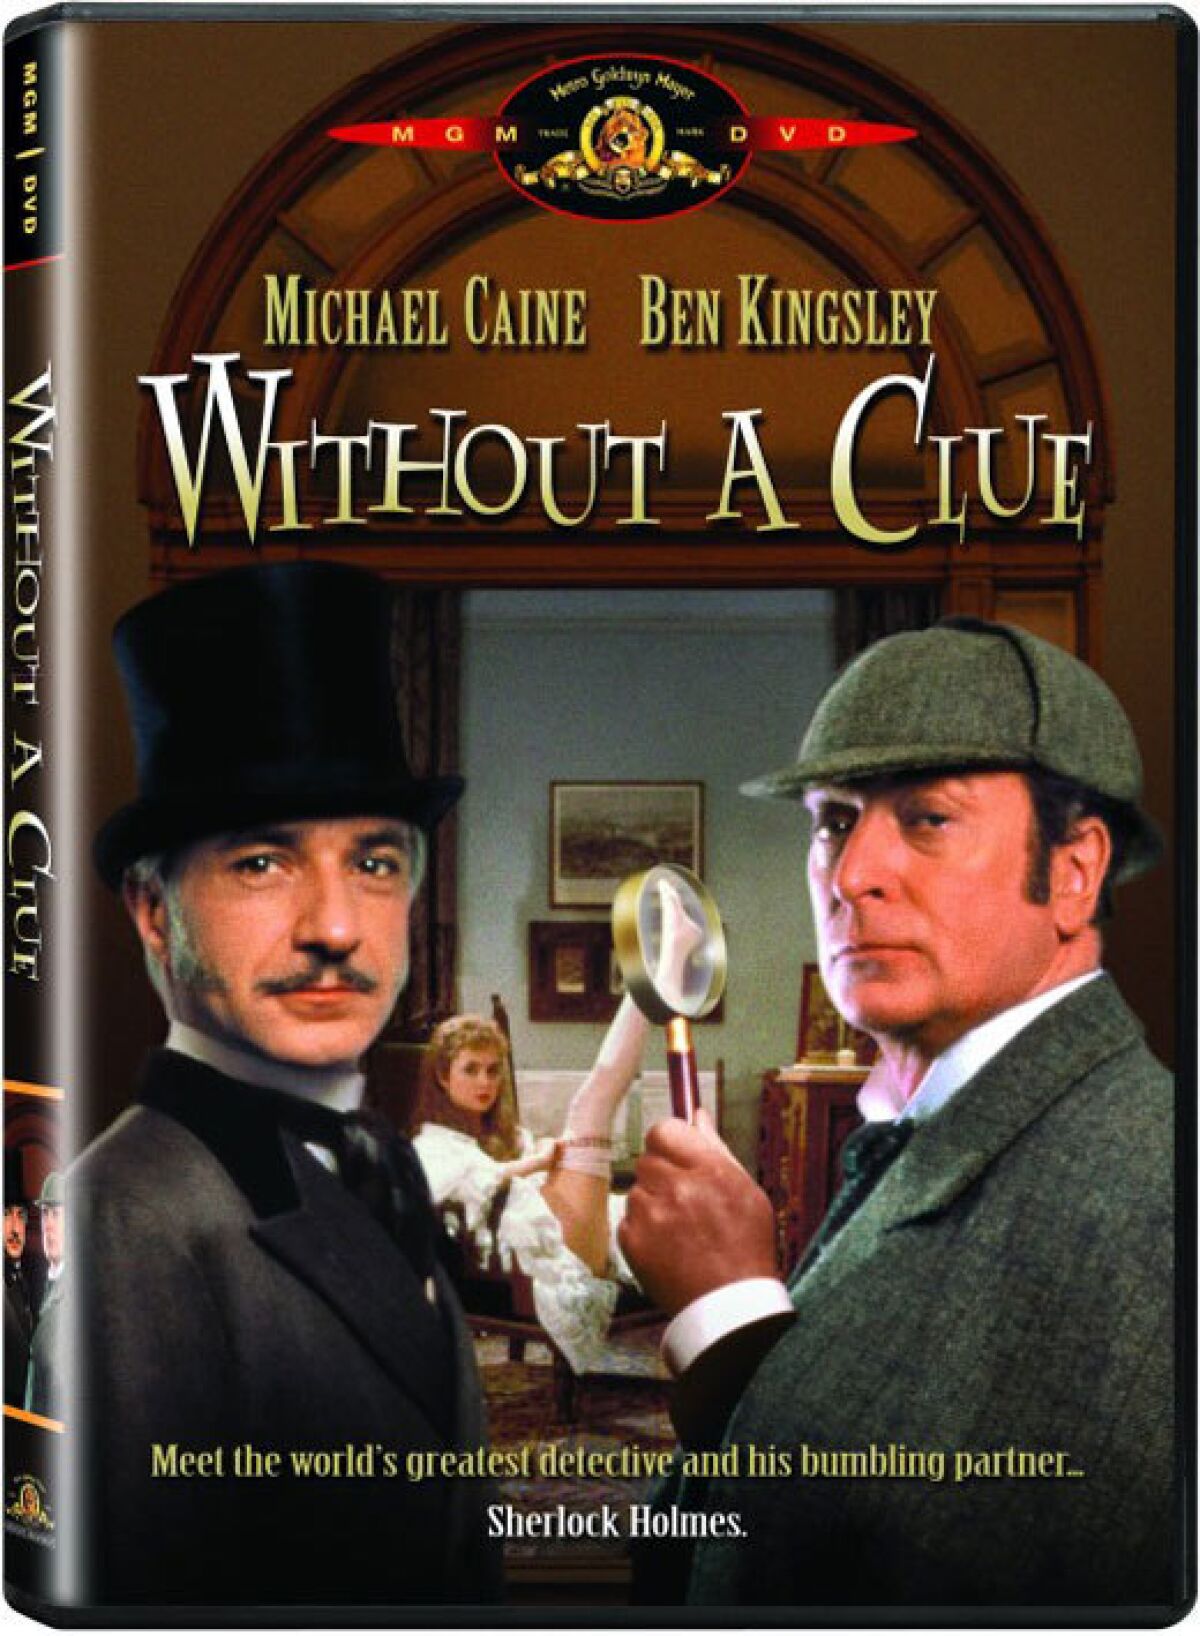 Ben Kingsley, left, as Dr. Watson and Michael Caine as Sherlock Holmes in "Without a Clue."